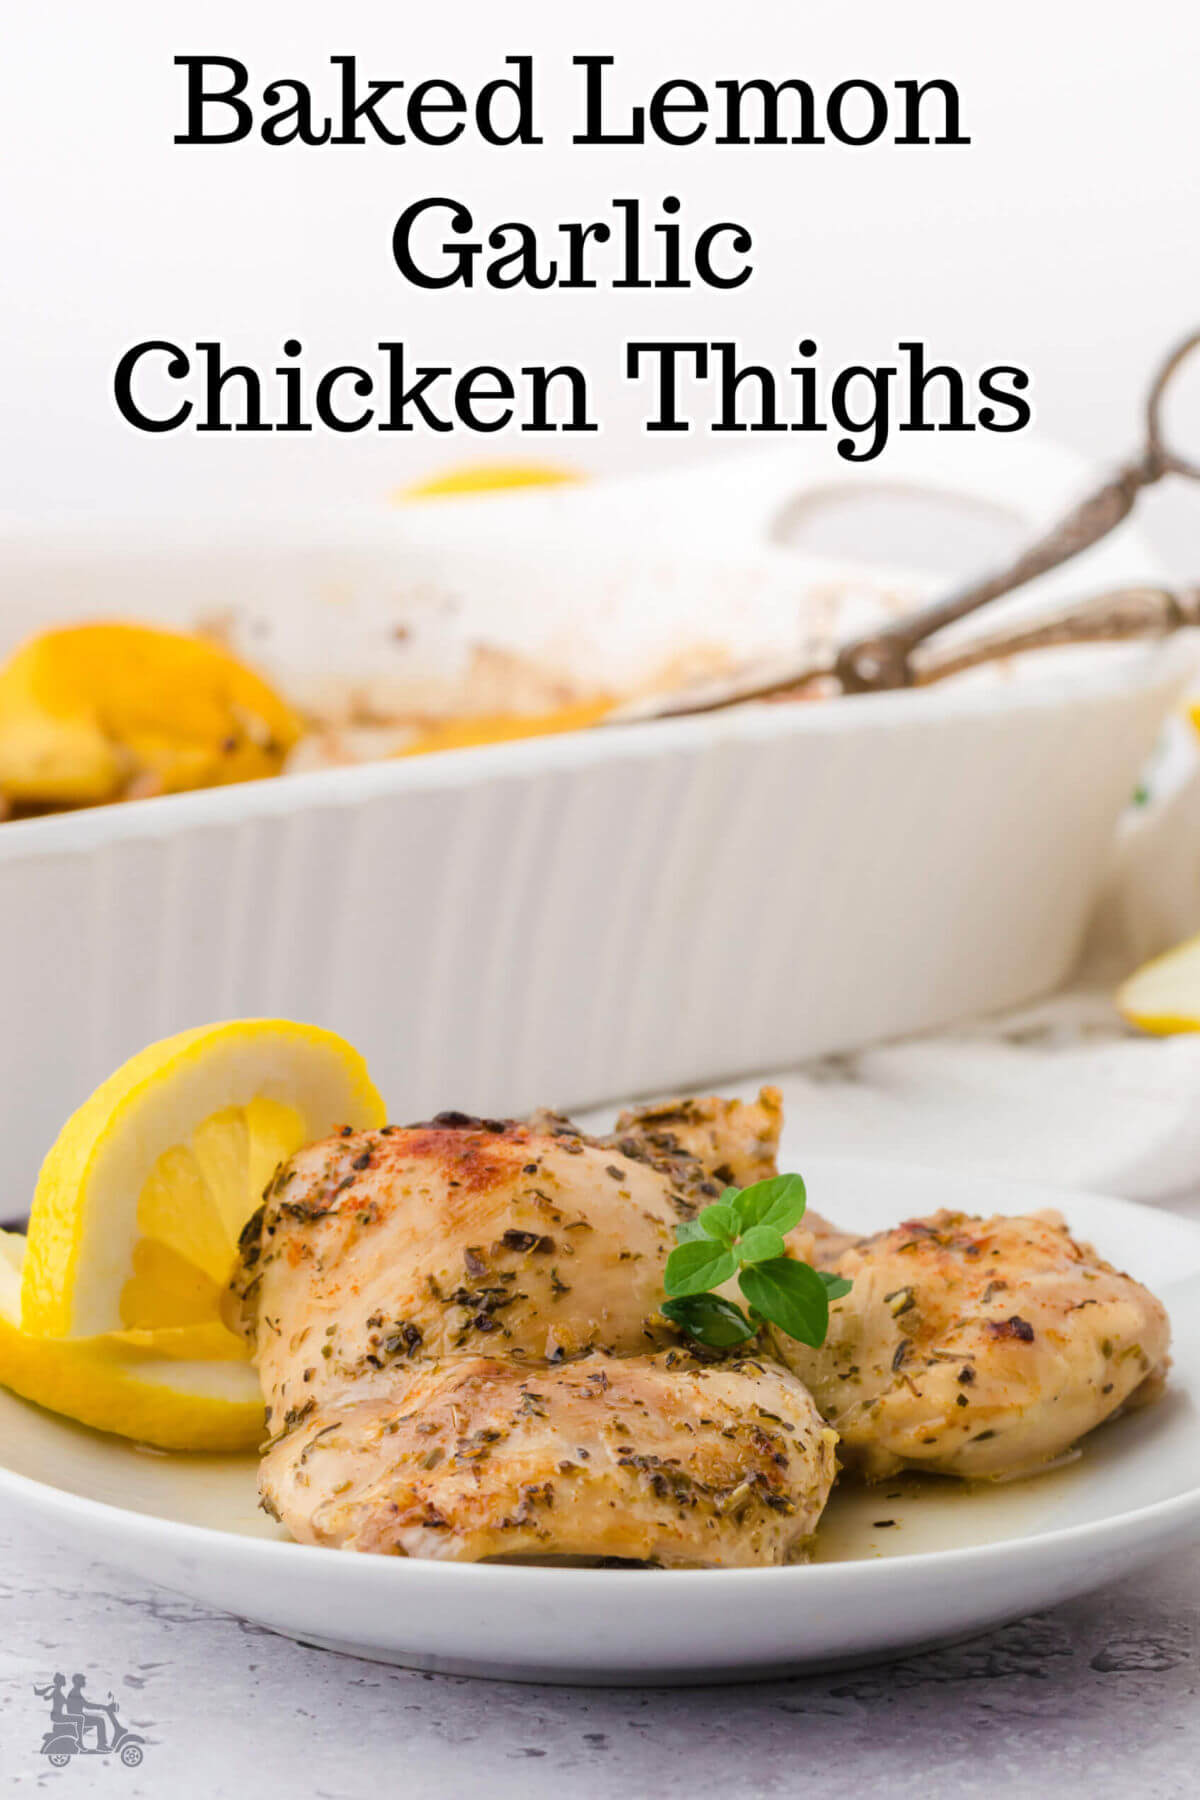 Boneless skinless chicken thighs roasted in a lemon and garlic marinade.